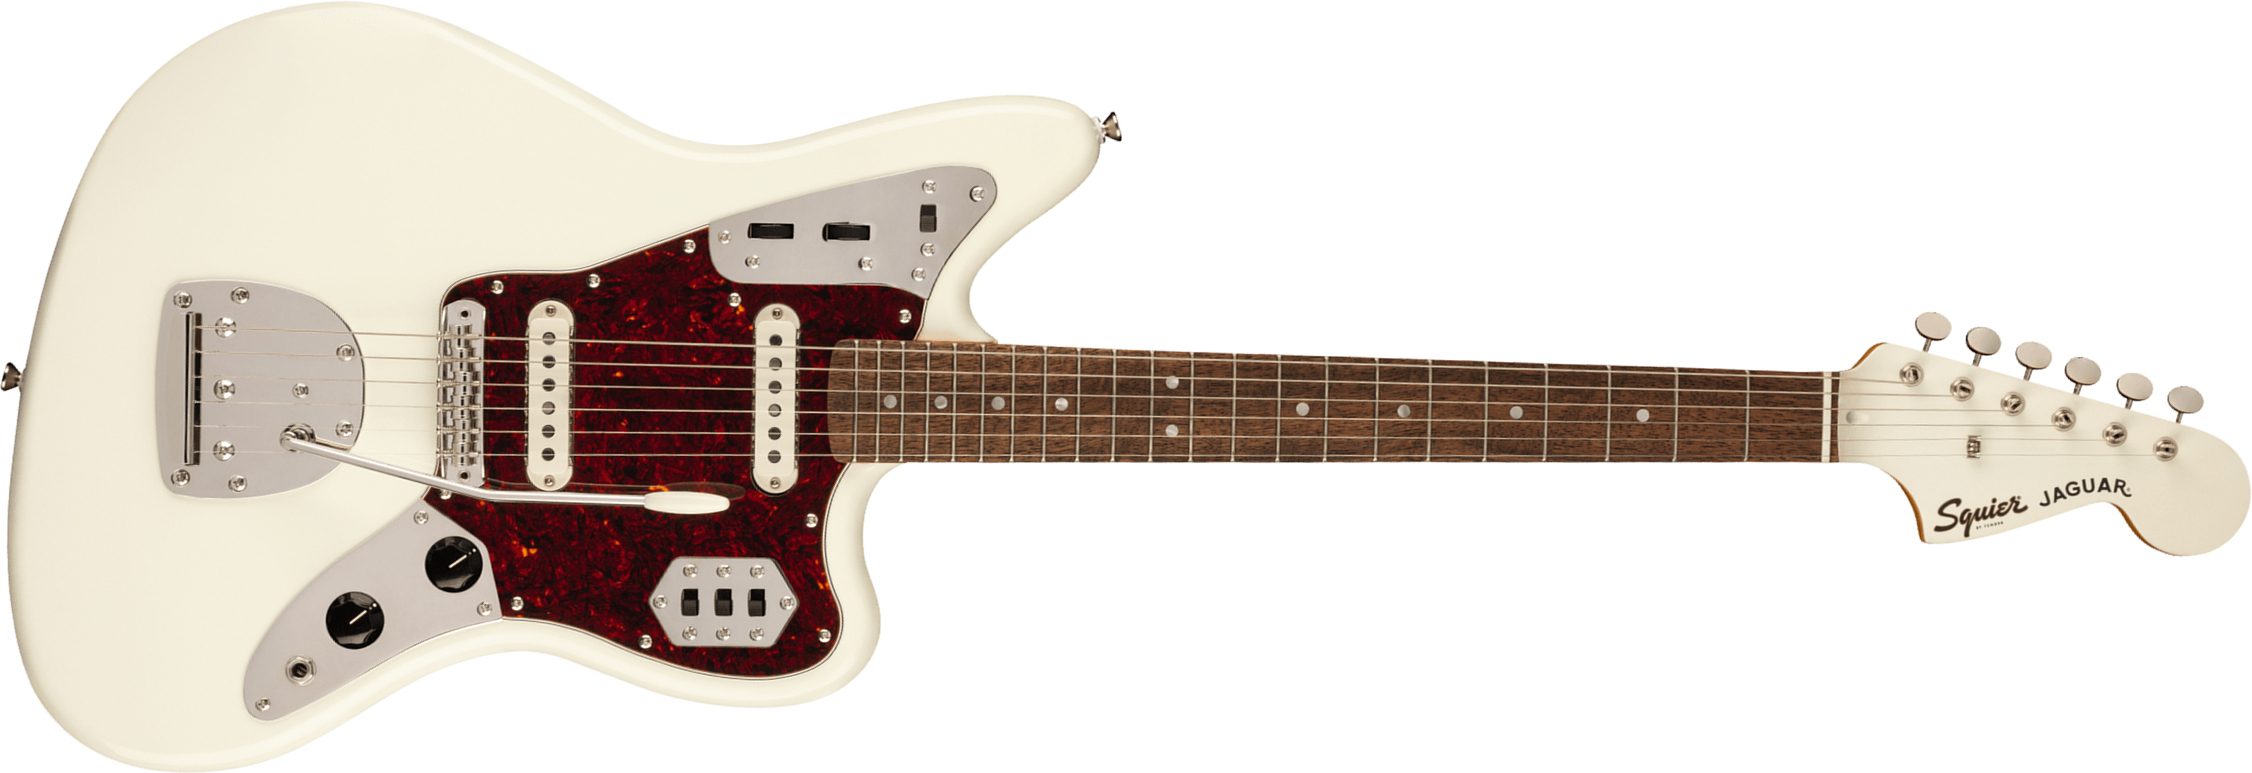 Squier Jaguar Classic Vibe 60s Fsr Ltd Lau - Olympic White With Matching Headstock - Guitarra electrica retro rock - Main picture